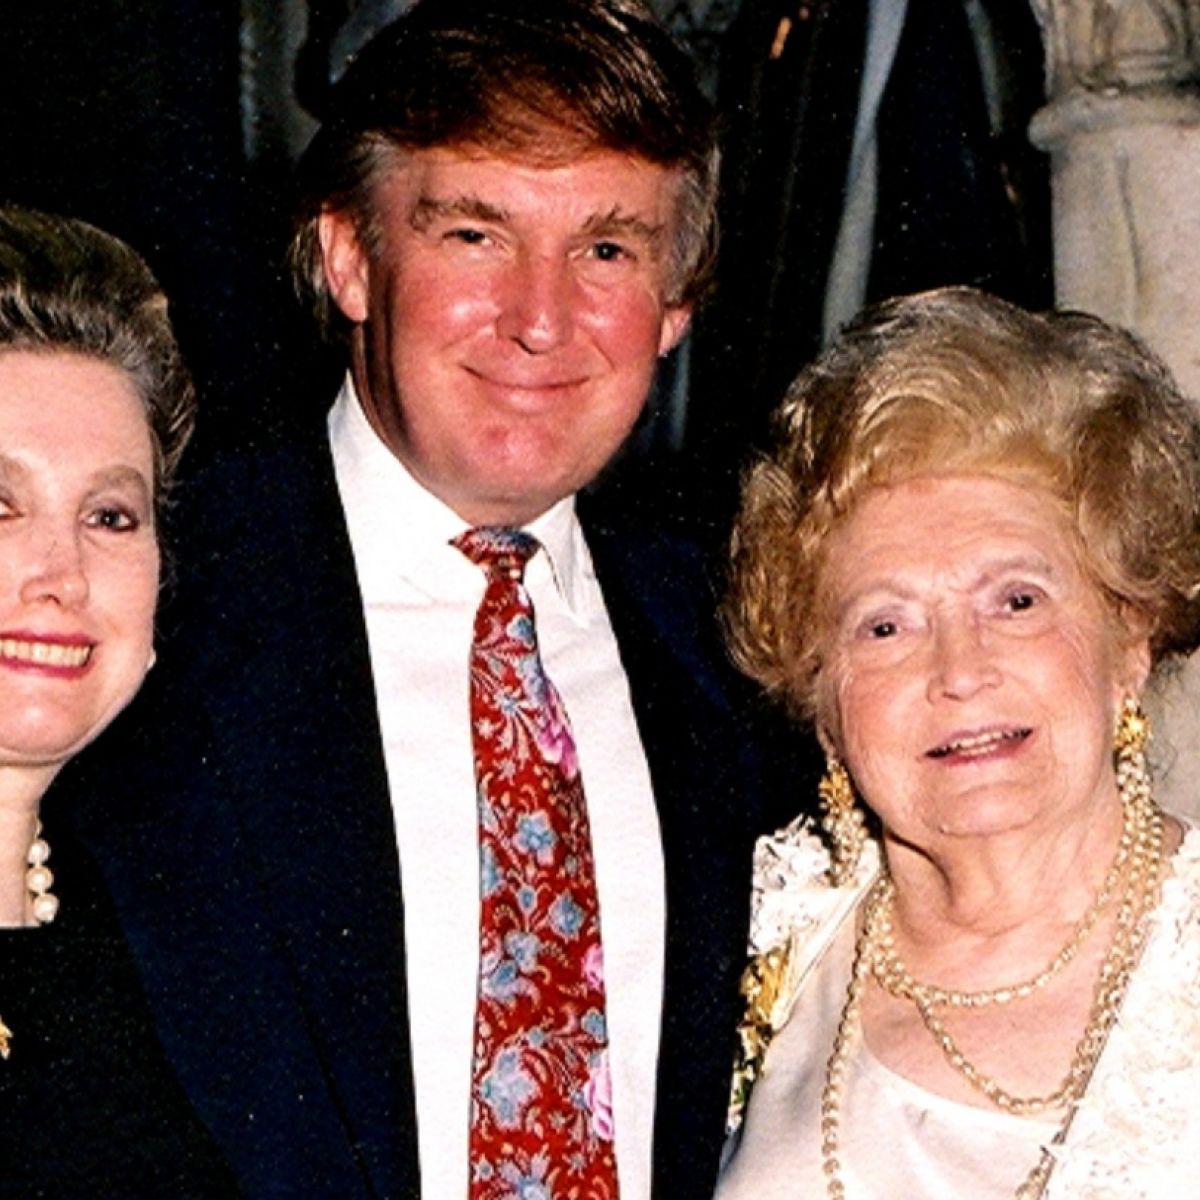 Trump Never Gave A Penny To Island His Mother Grew Up On Documentary Claims